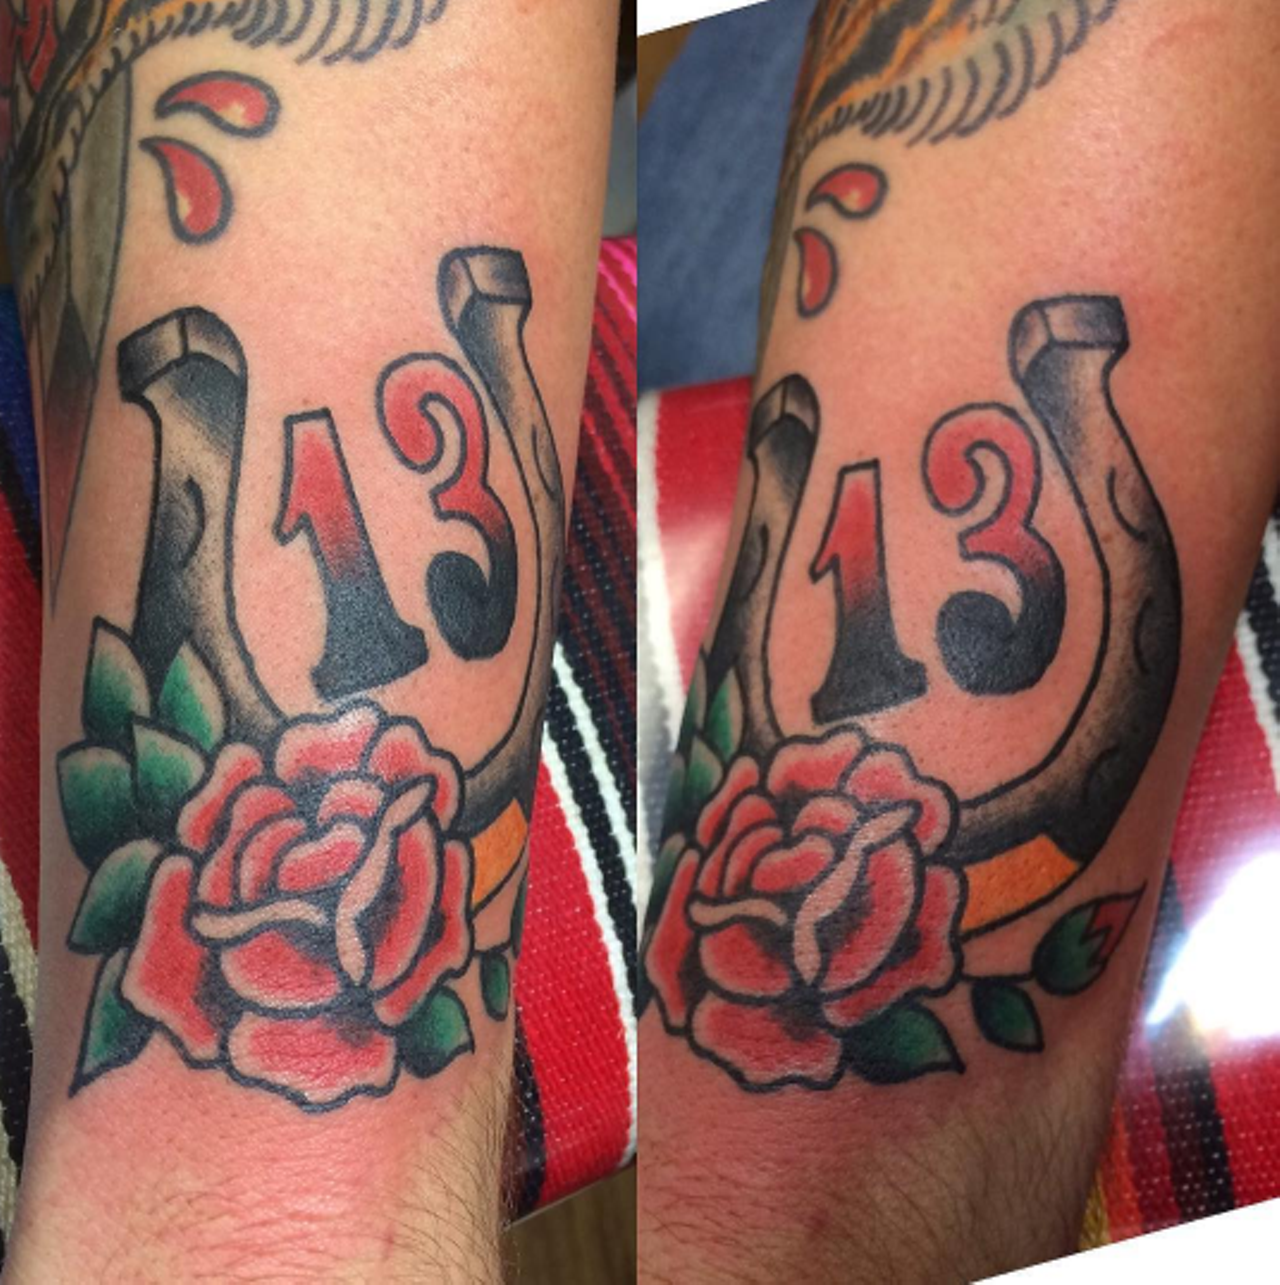 Mr Lucky's Tattoo
Address: 2856 Thousand Oaks
Call (210) 736-6900 for hours and more information. 
Photo via Instagram/Mr Lucky's Tattoo